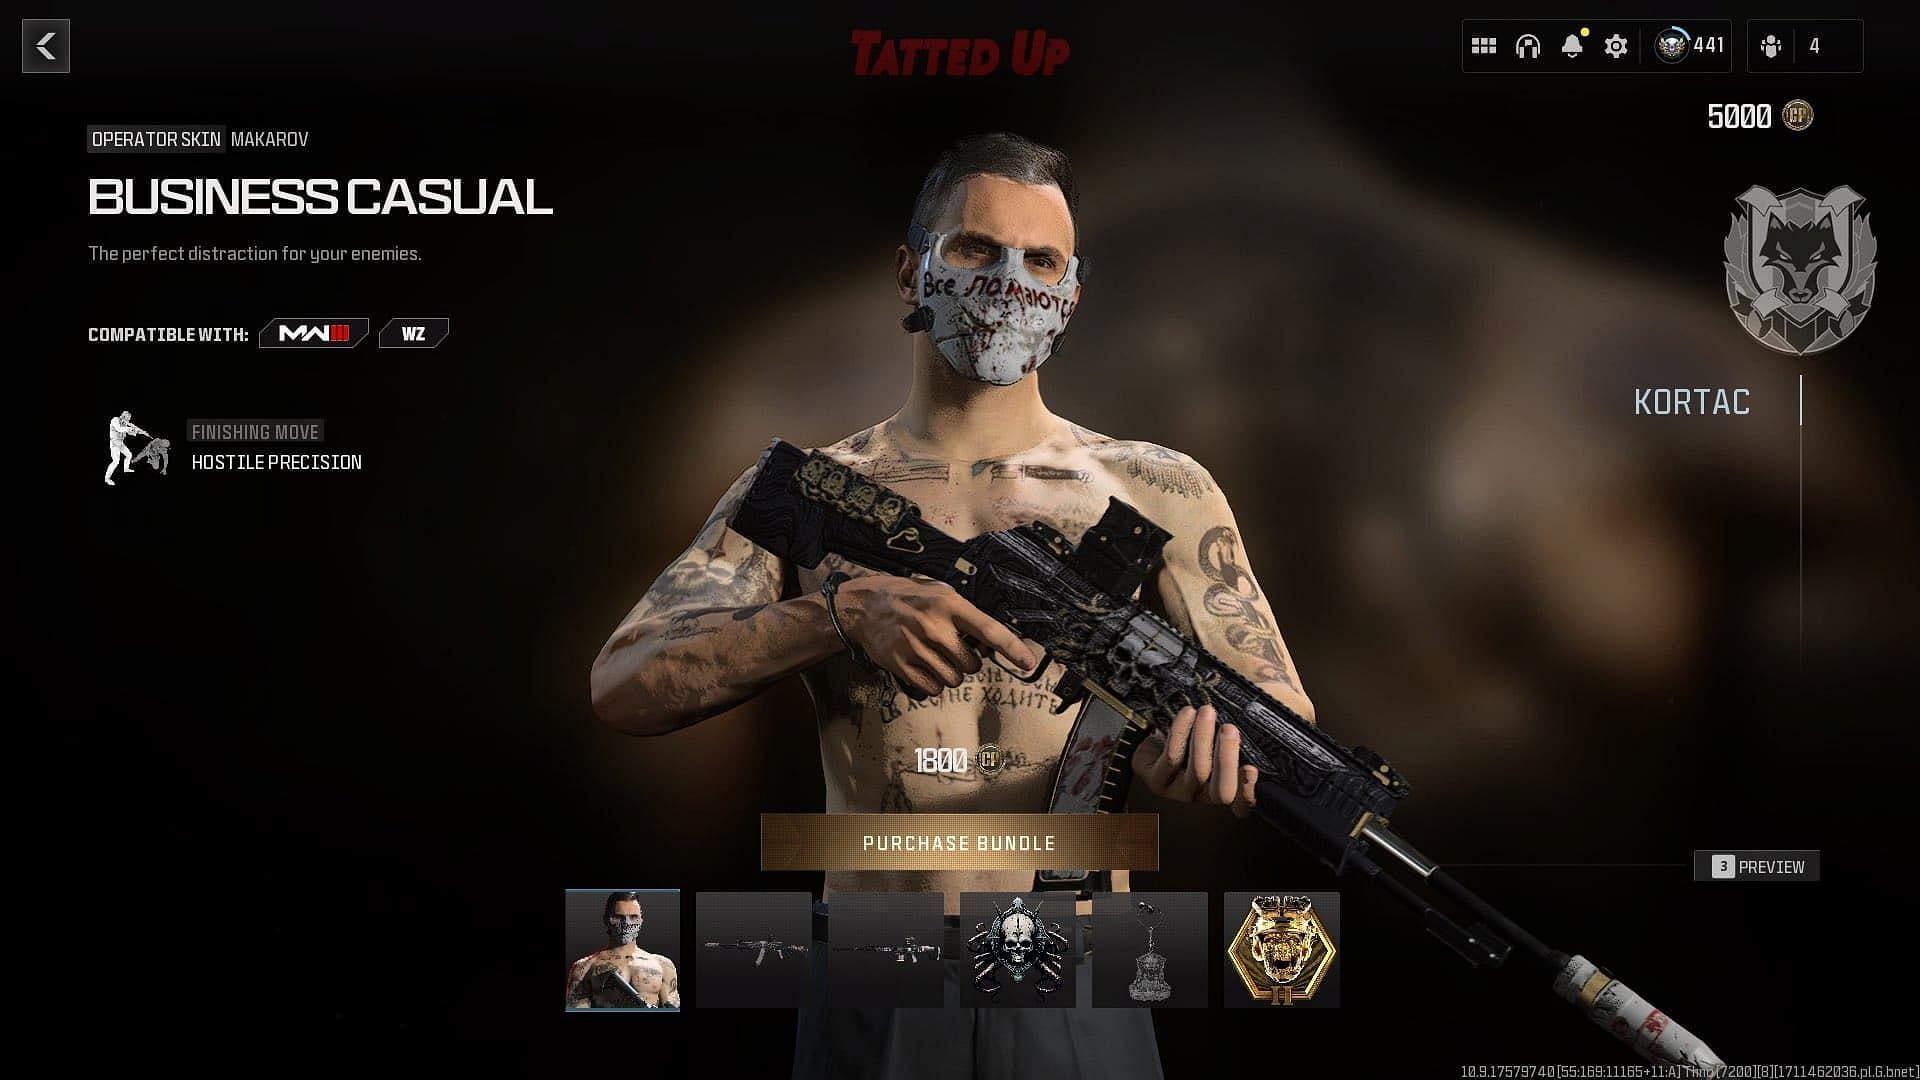 Tatted Up bundle in MW3 and Warzone